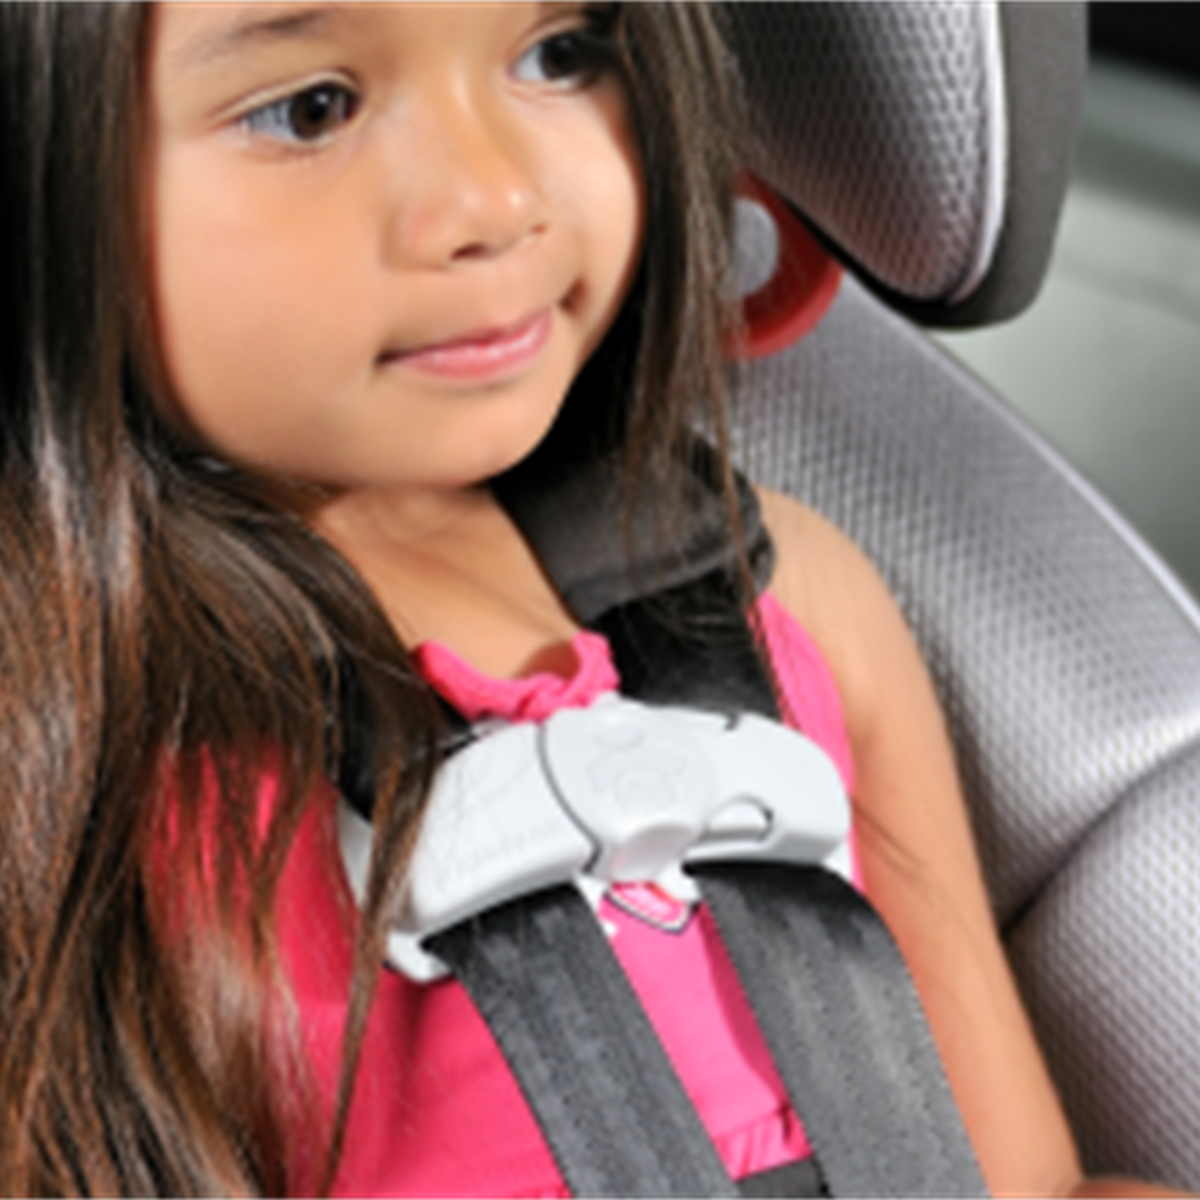 Car Seats Information For Families Healthychildren Org - What Are The Rules For Forward Facing Car Seats